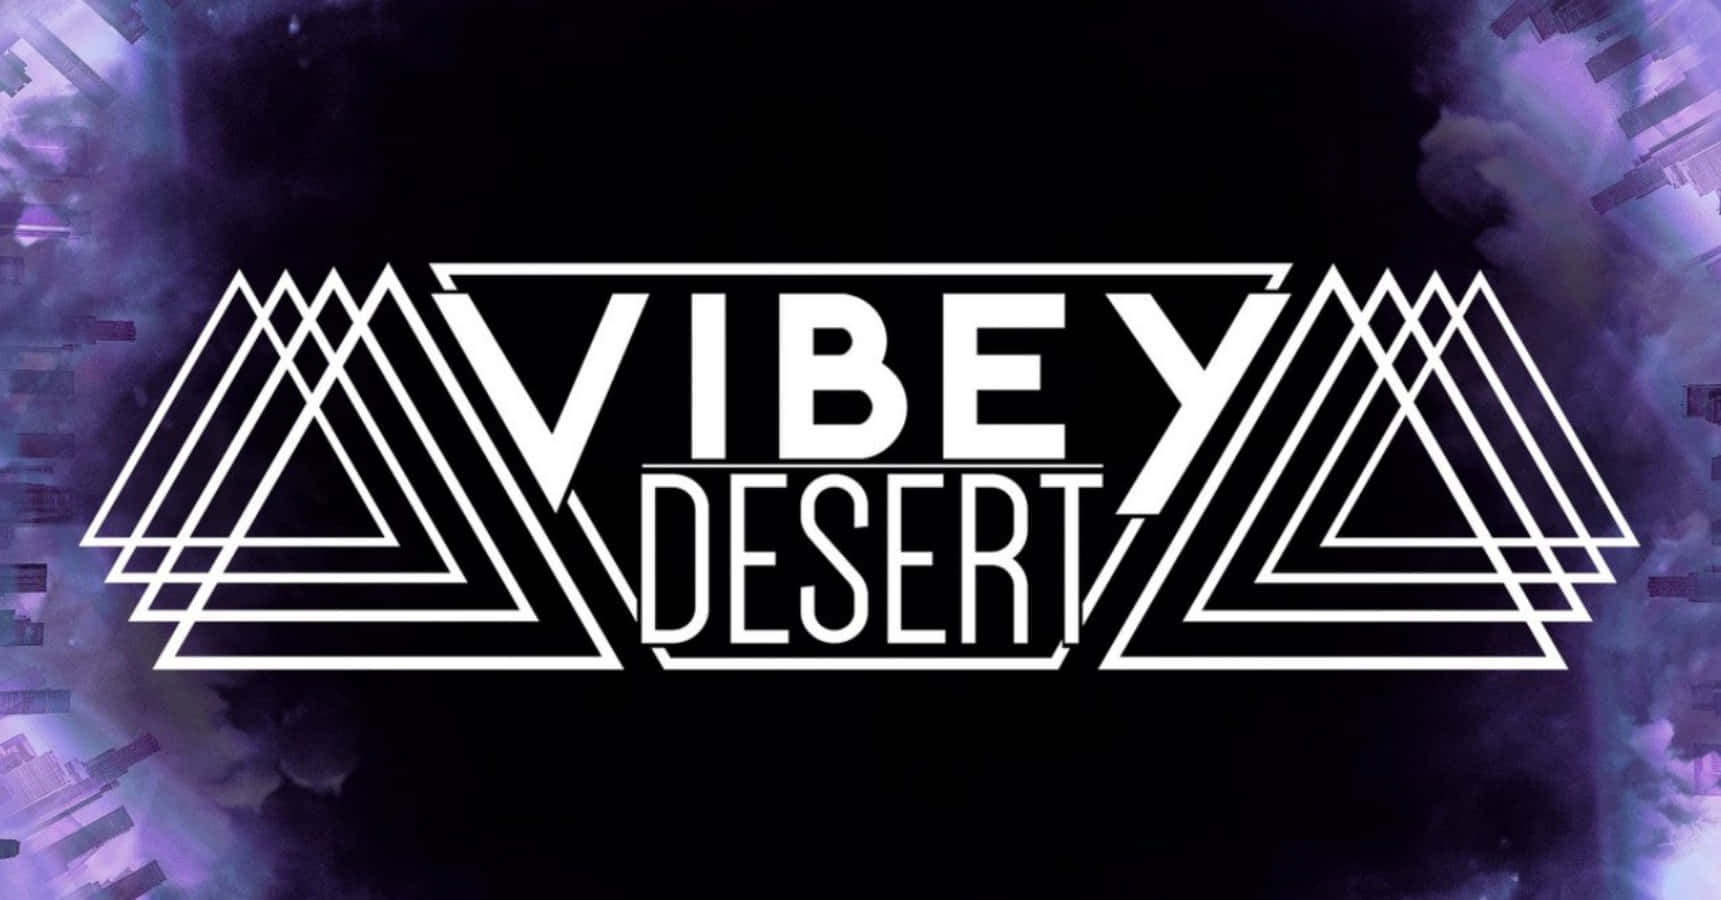 "Find your vibe with Vibey!"